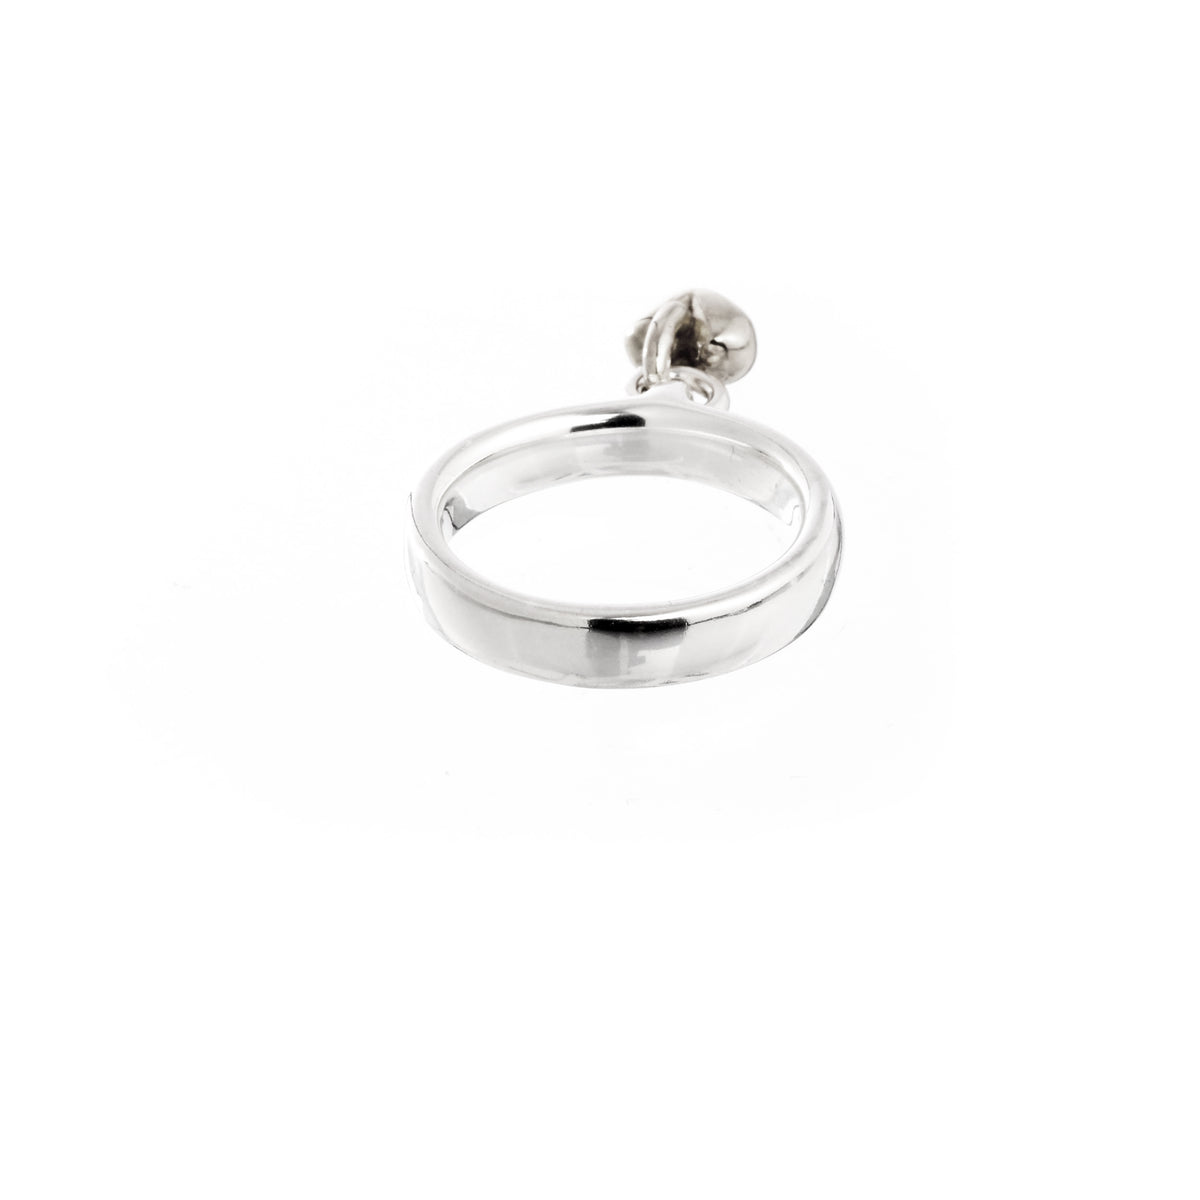 Sweetheart Silver Charm Ring